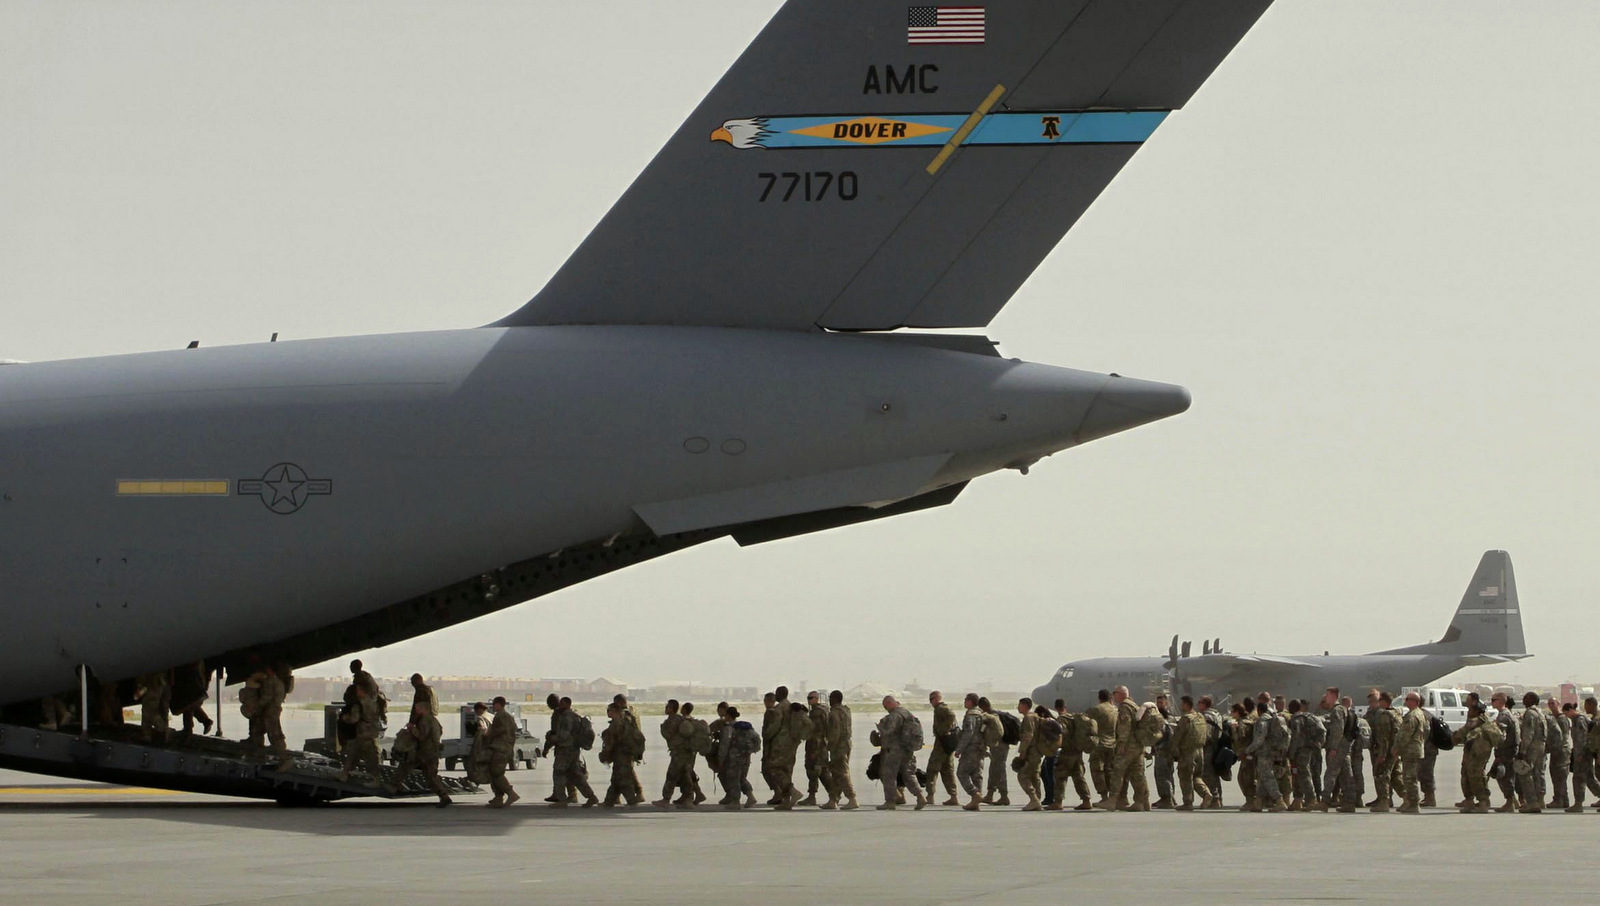 U.S. soldiers board a U.S. military aircraft in Bagram, north of Kabul, Afghanistan. 